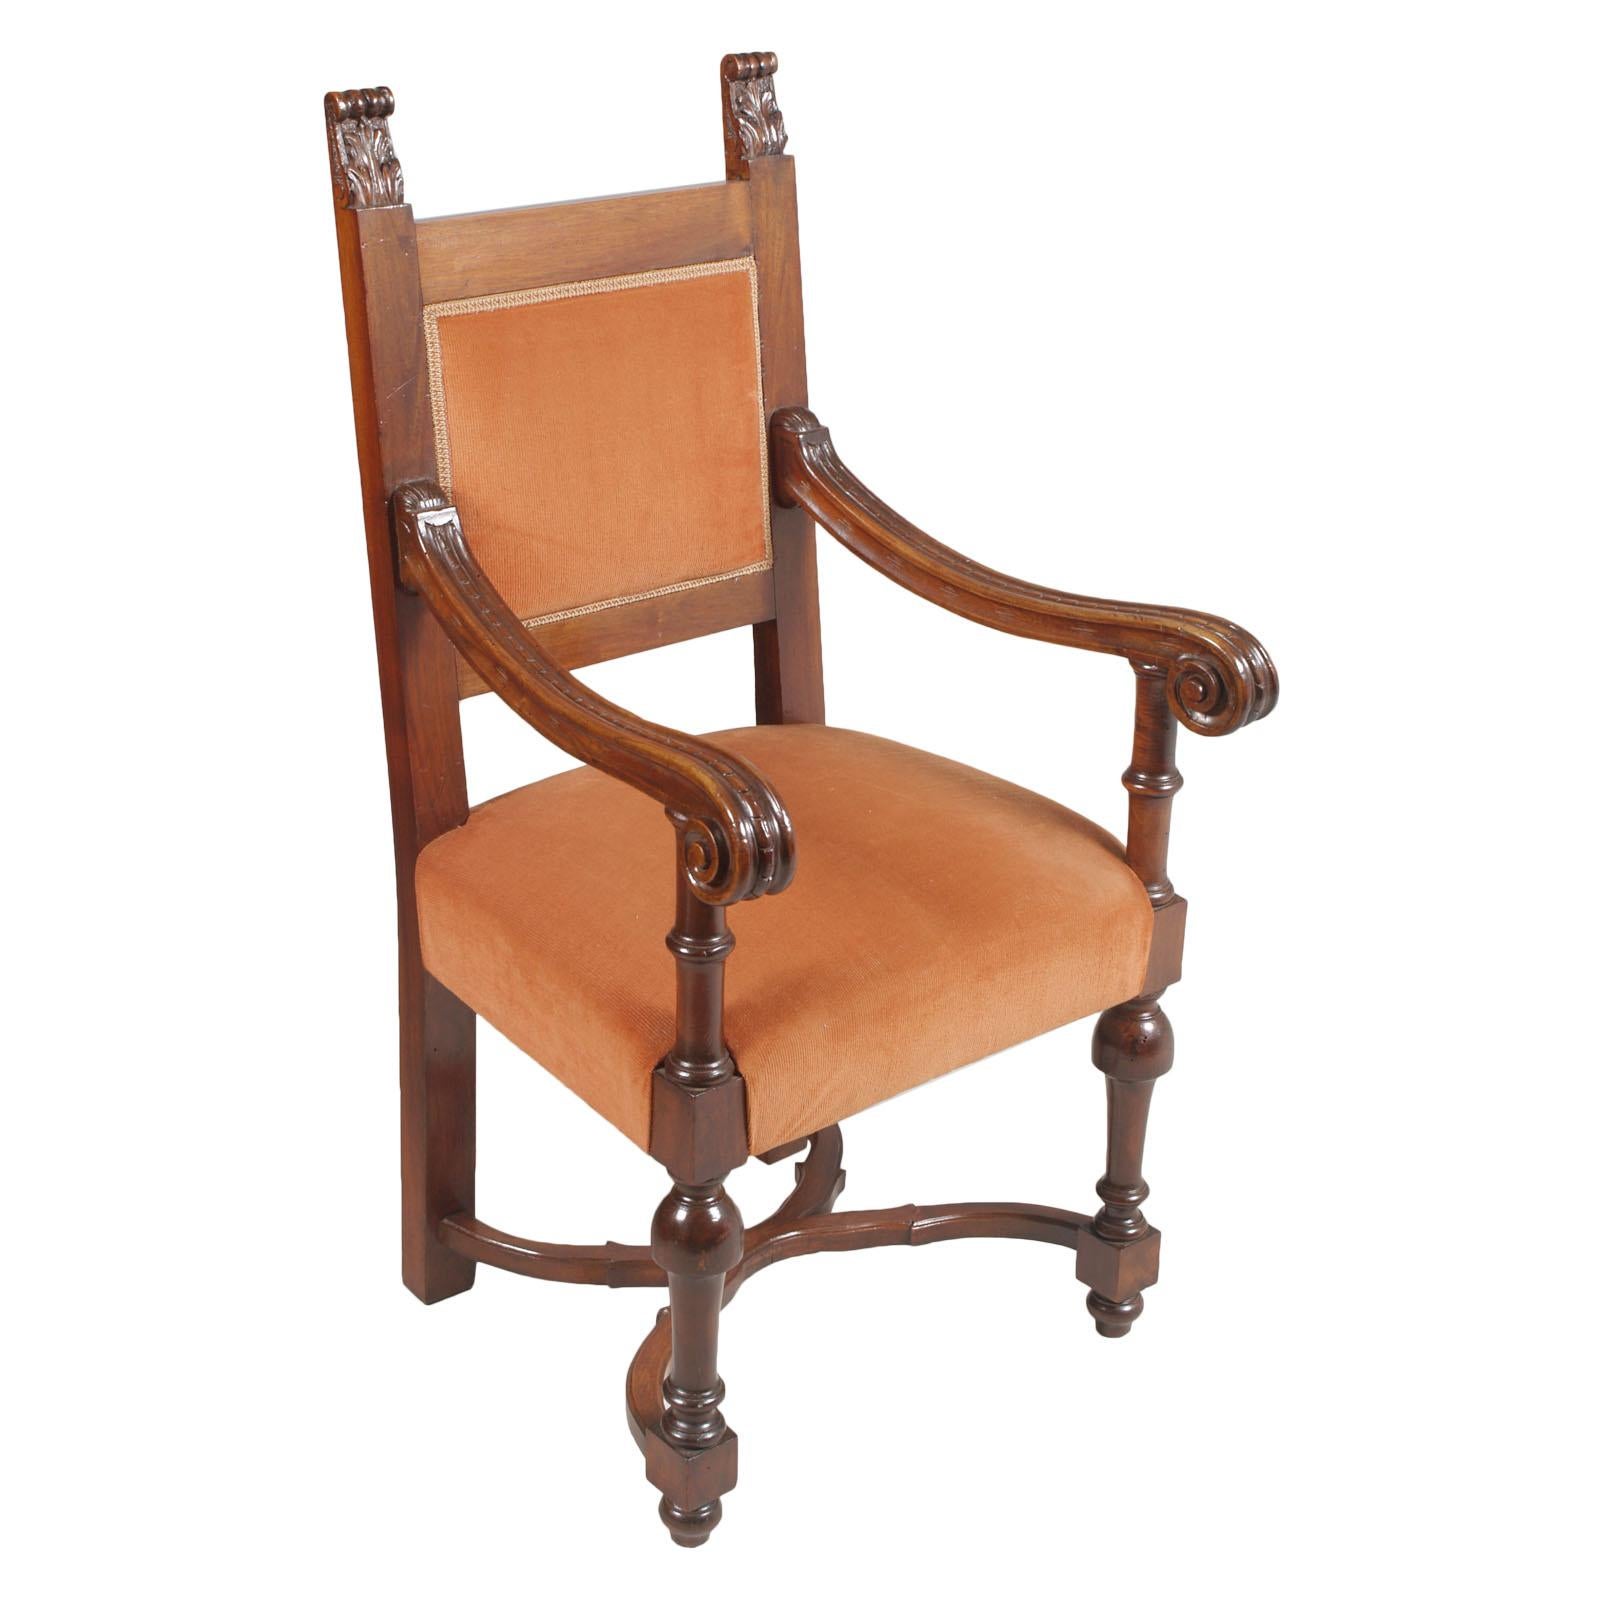 Early 20th Century Carved Renaissance Tuscany Throne Armchair, Wax-Polished